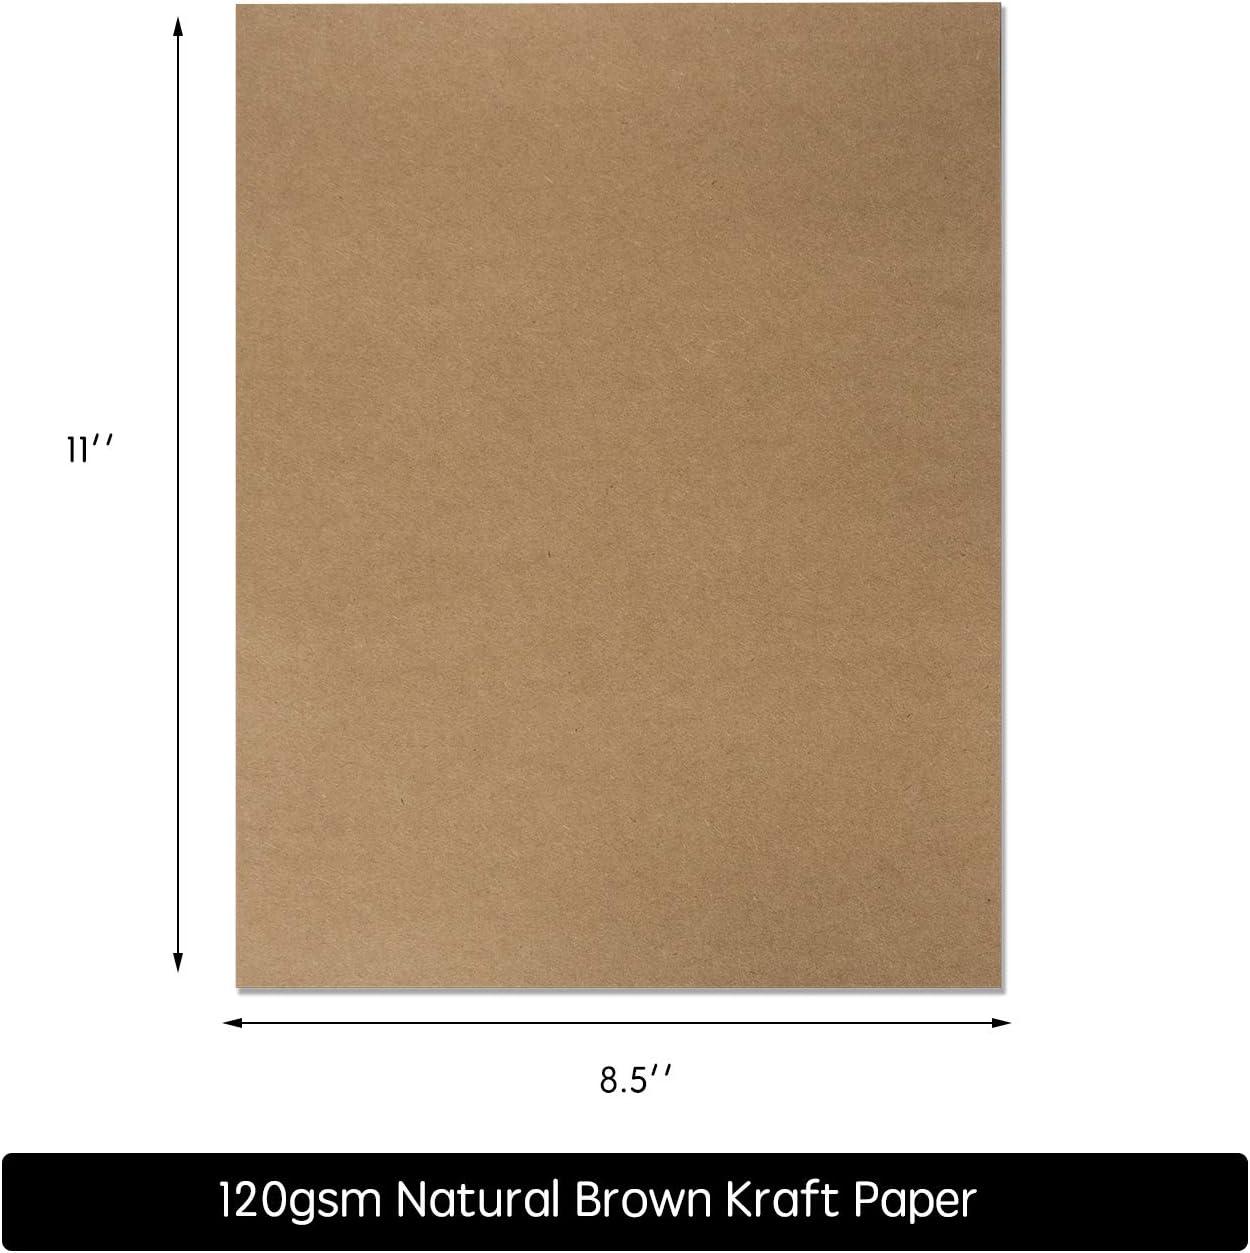 120 Pack Kraft Paper - Brown Stationery Paper- Brown Craft Paper for Arts and Craft, Drawing, D.I.Y. Projects - Letter Size Kraft Paper - Laser & Ink